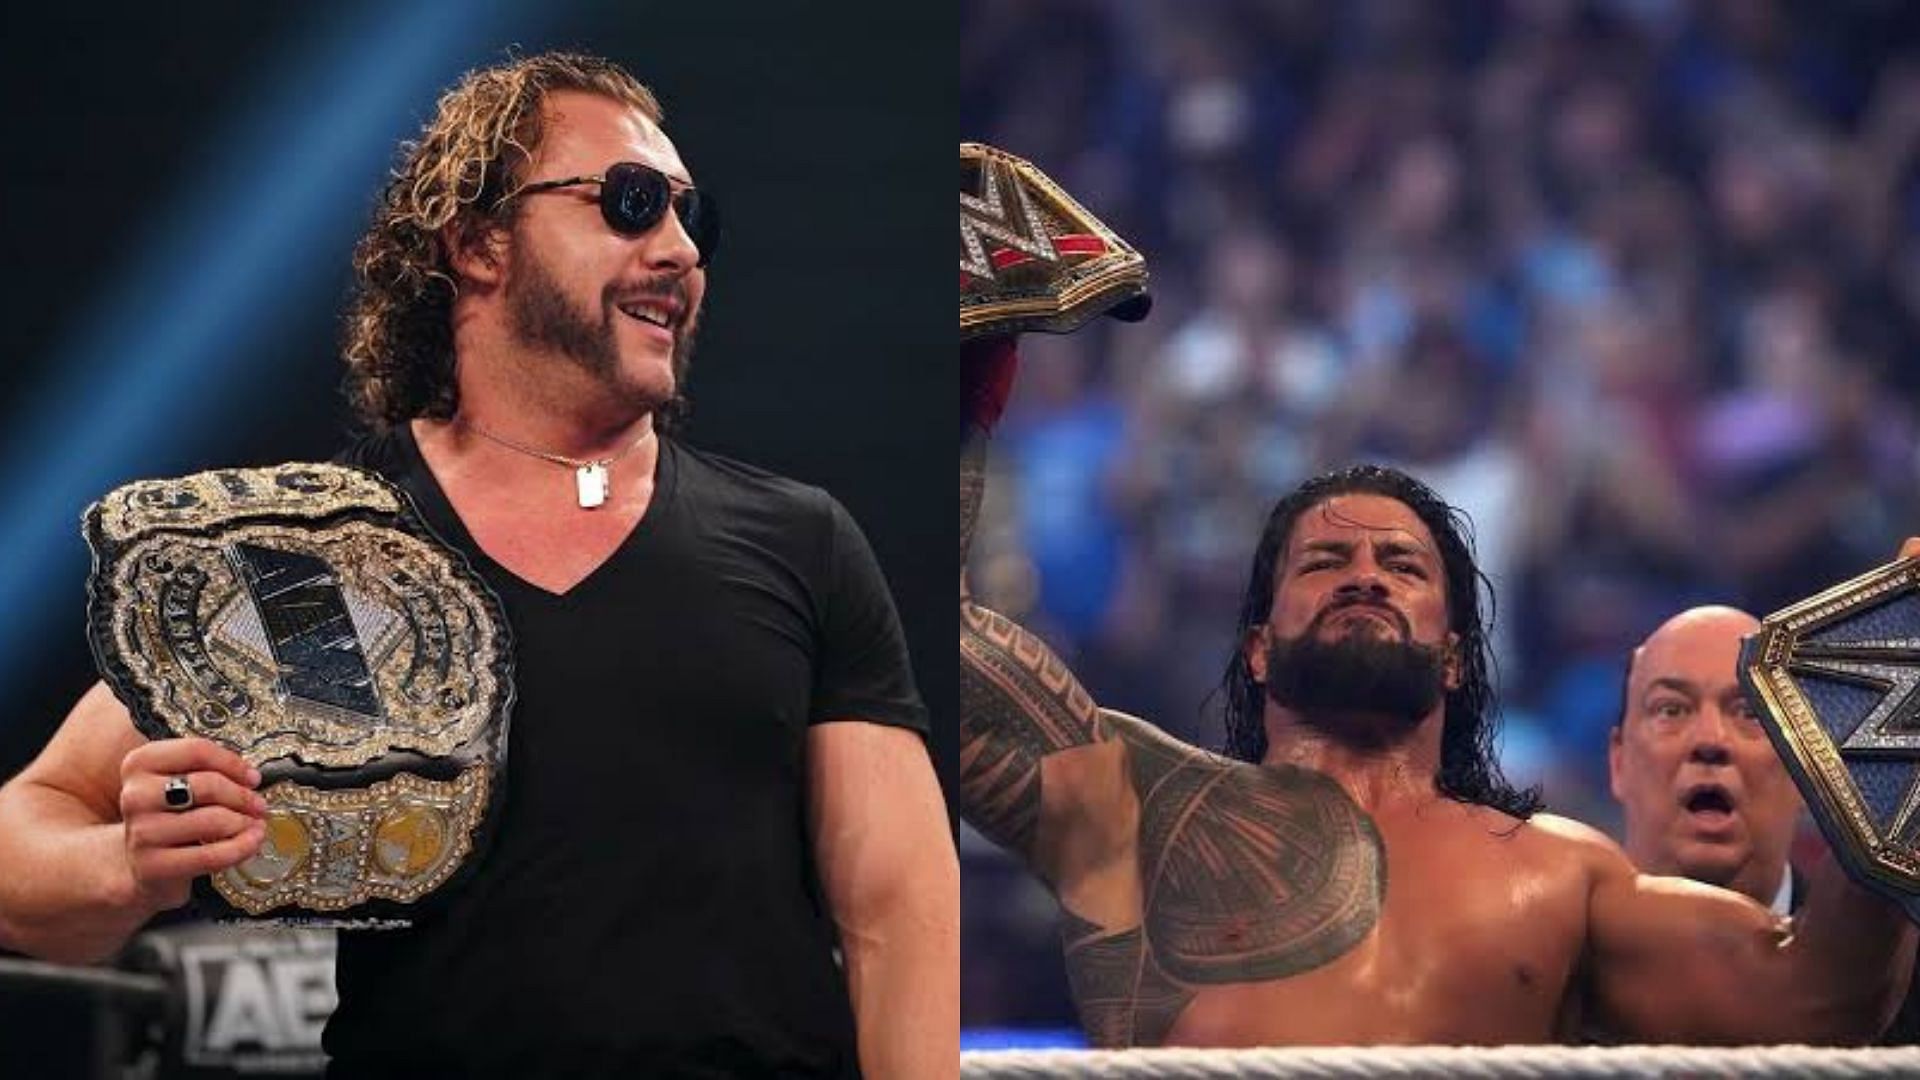 Kenny Omega has taken a hilarious jibe at Roman Reigns